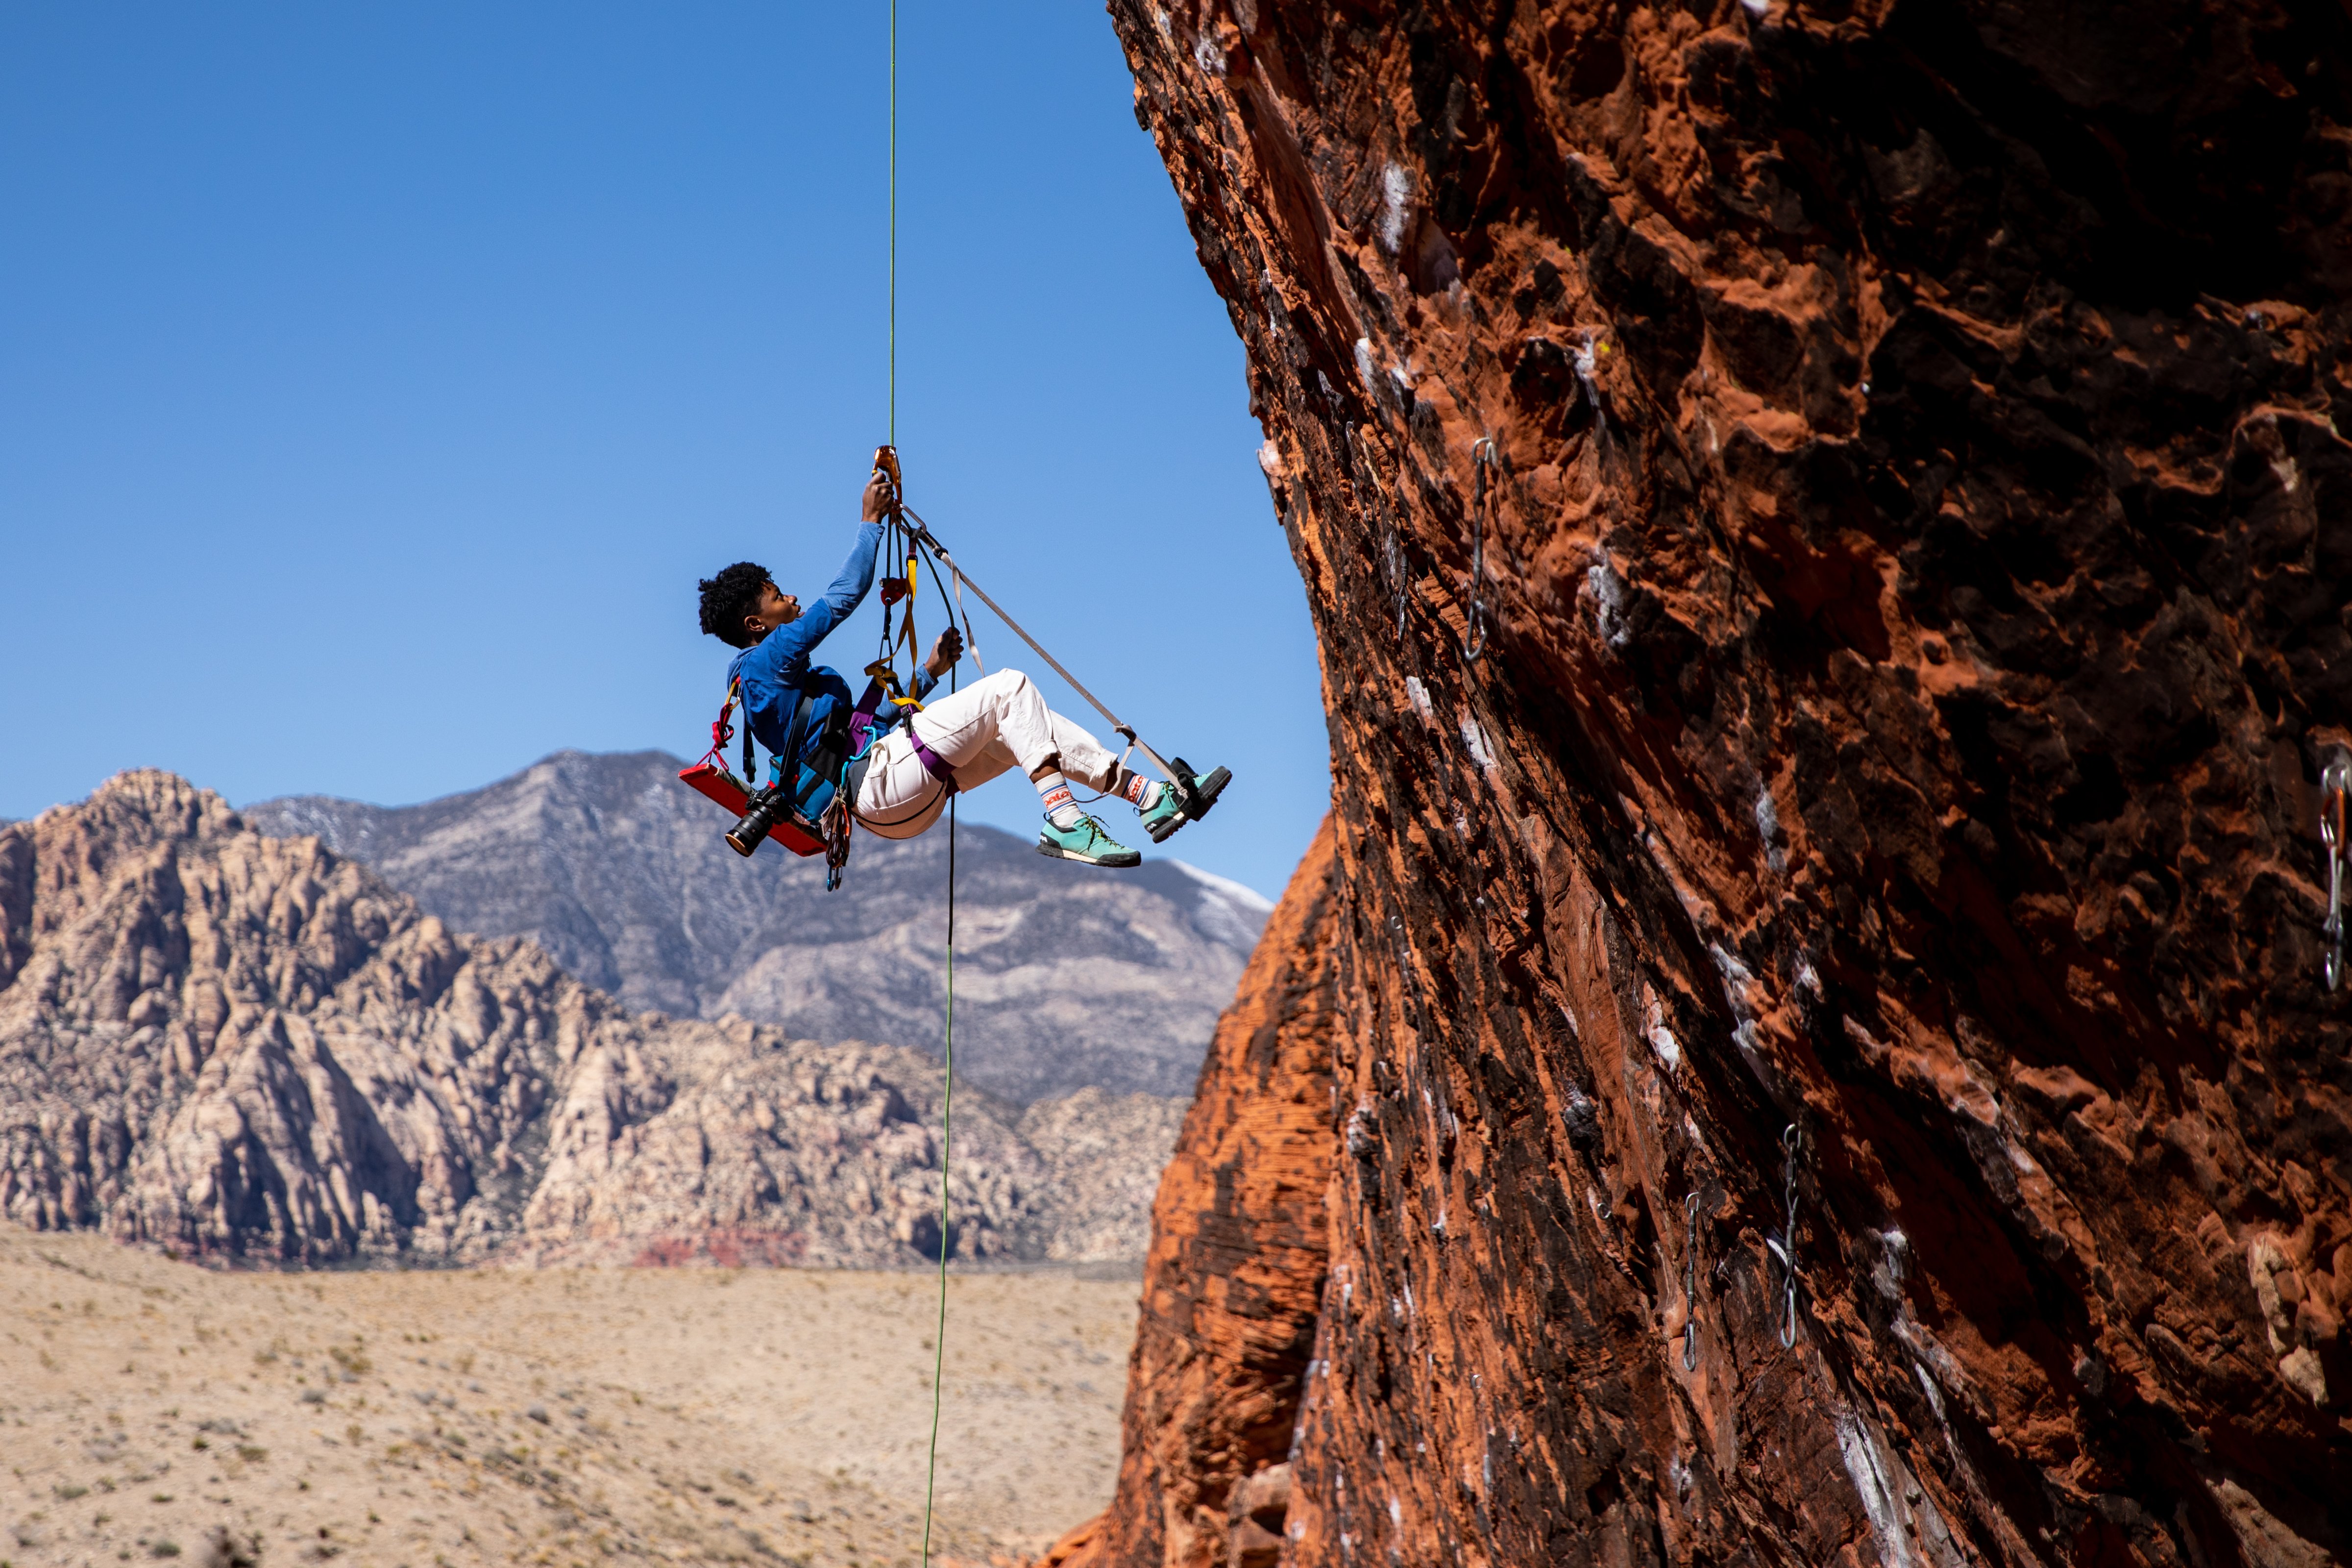 Blount ascends a static line in Red Rocks, just outside of Las Vegas, in March 2022. (Irene Yee)